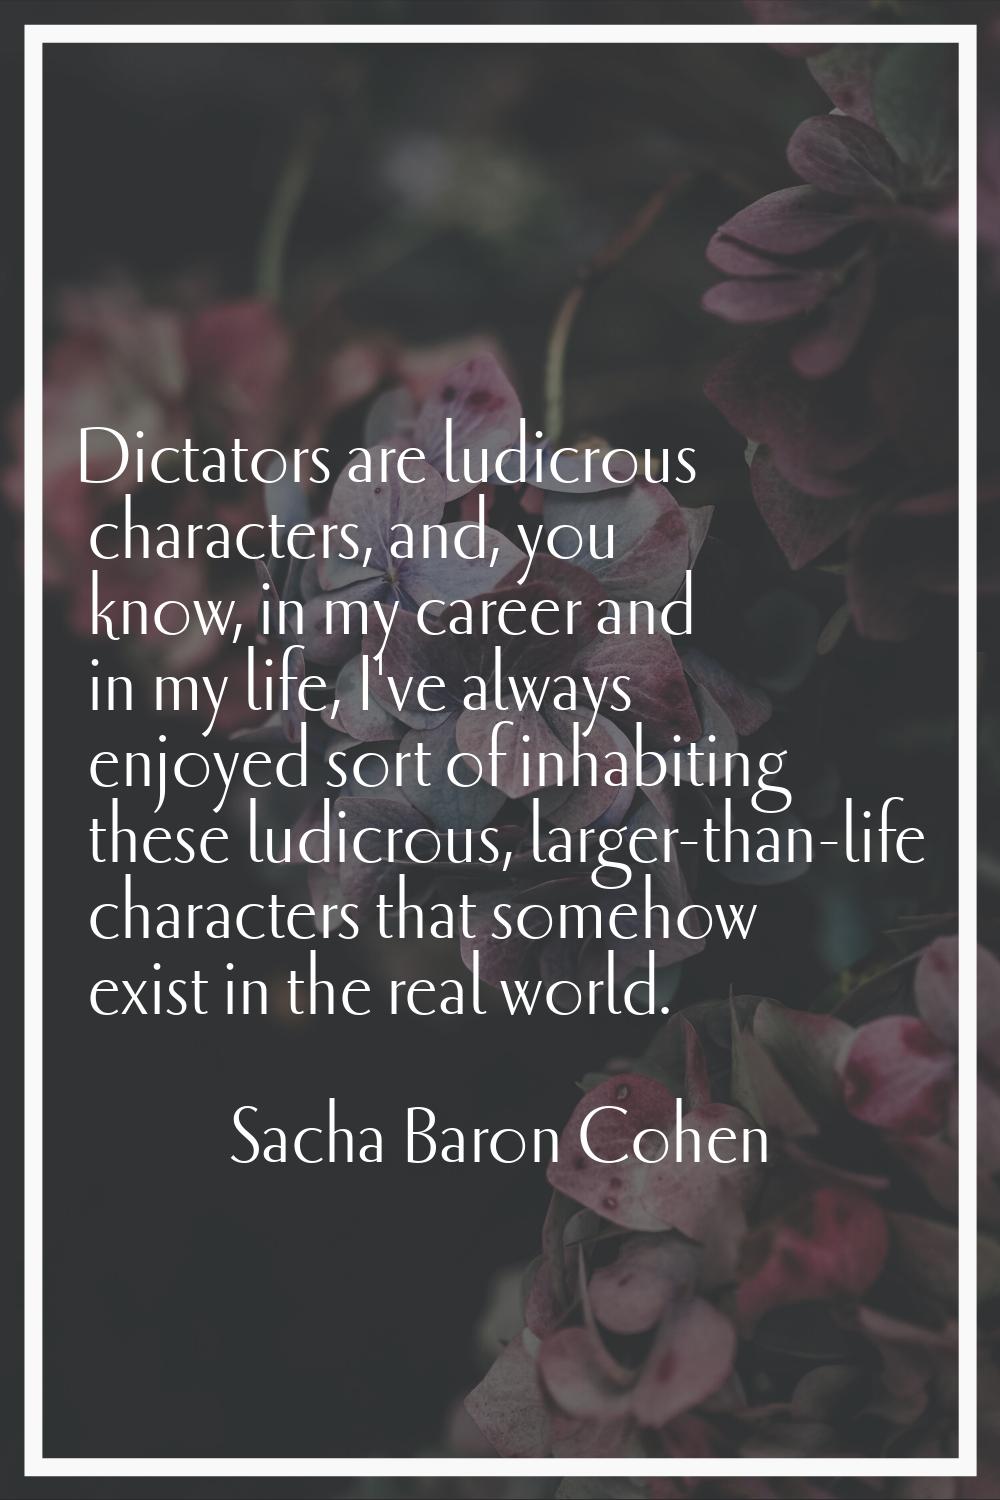 Dictators are ludicrous characters, and, you know, in my career and in my life, I've always enjoyed